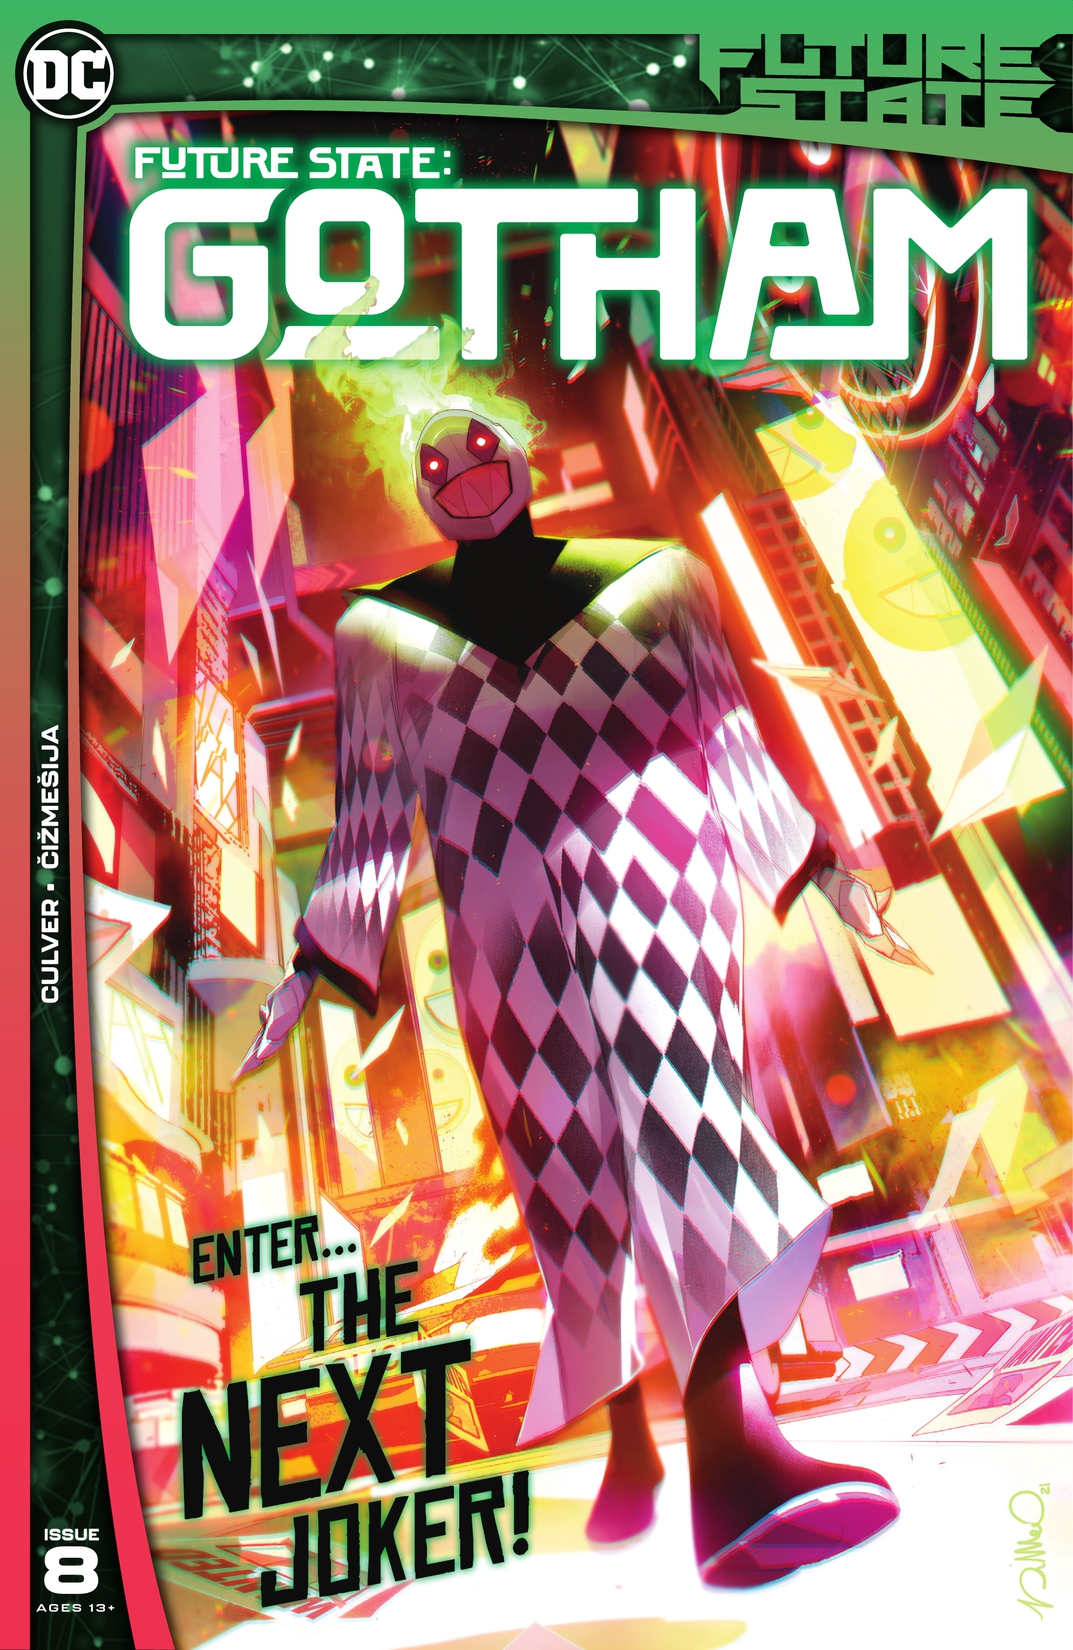 Future State: Gotham #8 preview images